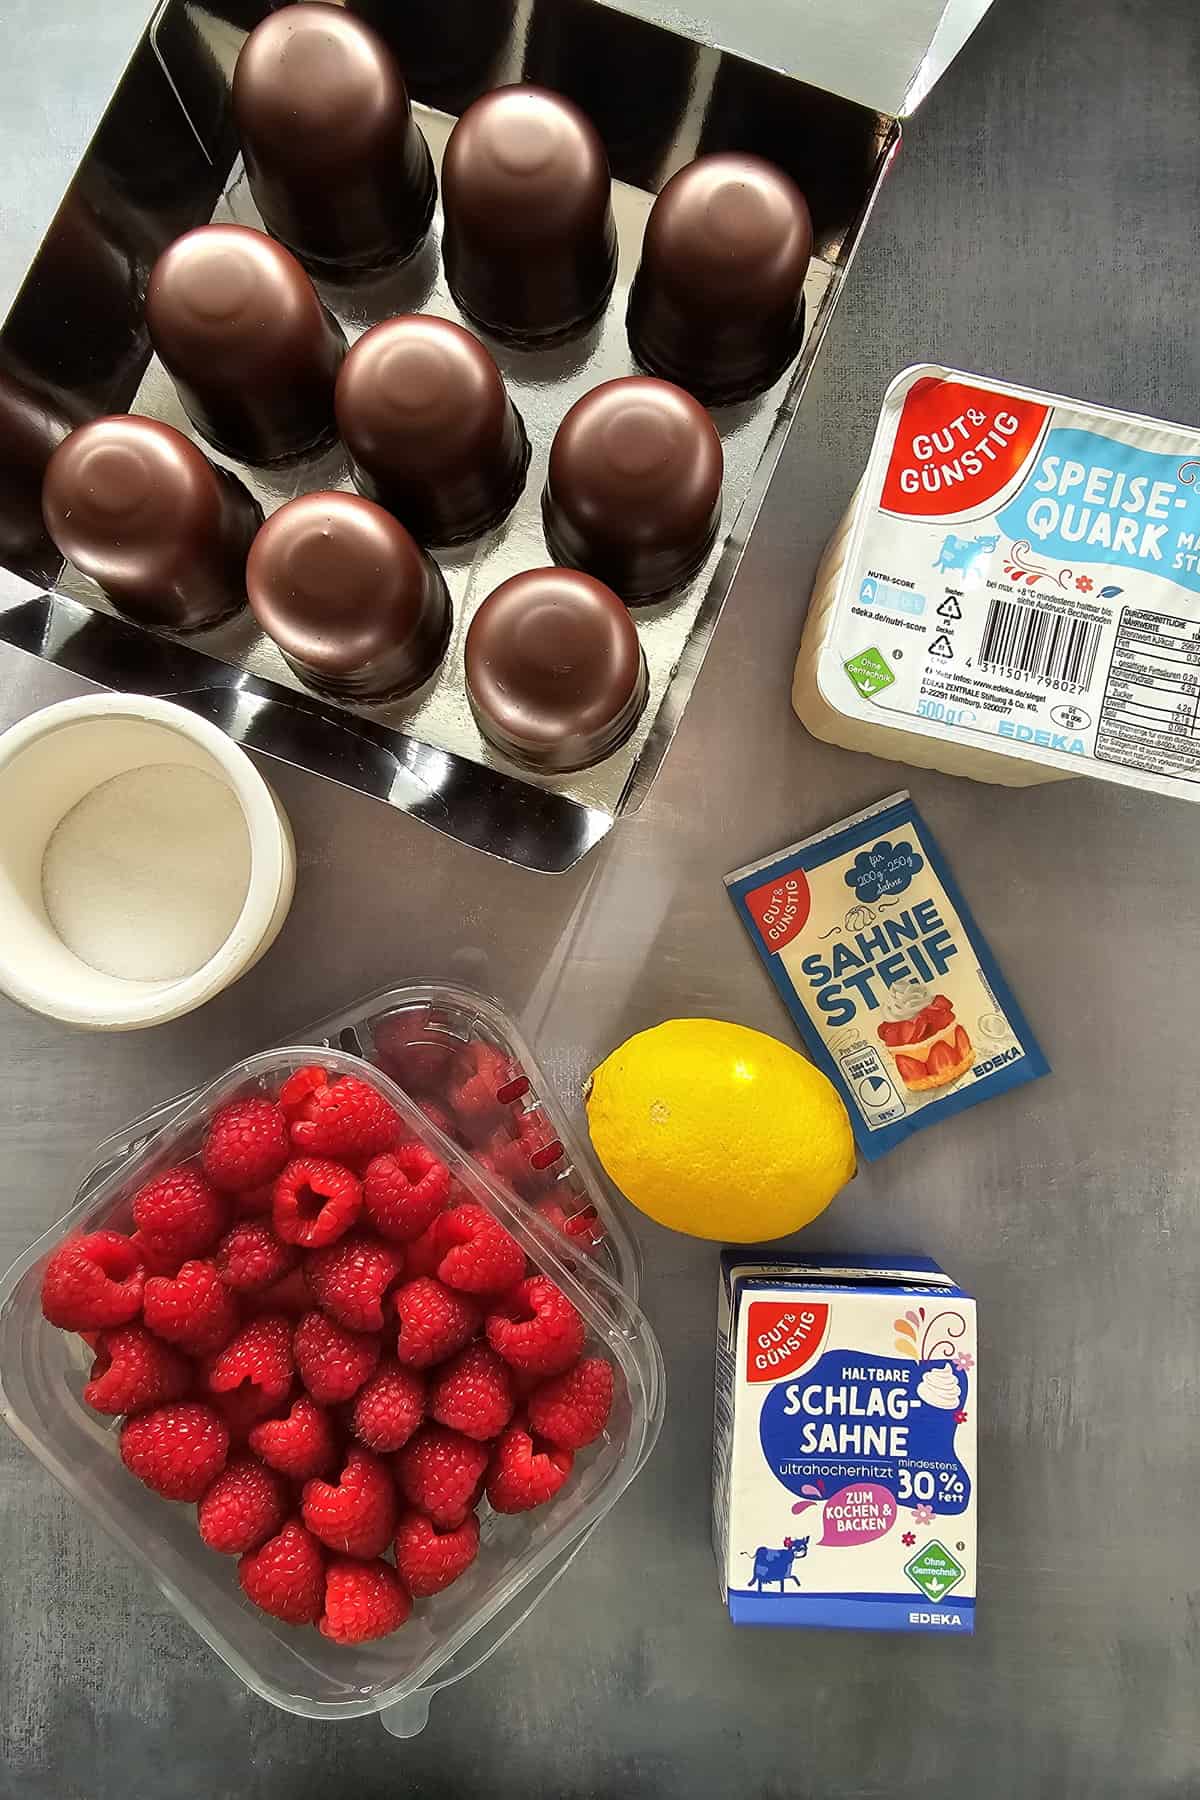 A compilation of the ingredients for Dickmann's dessert with raspberries.